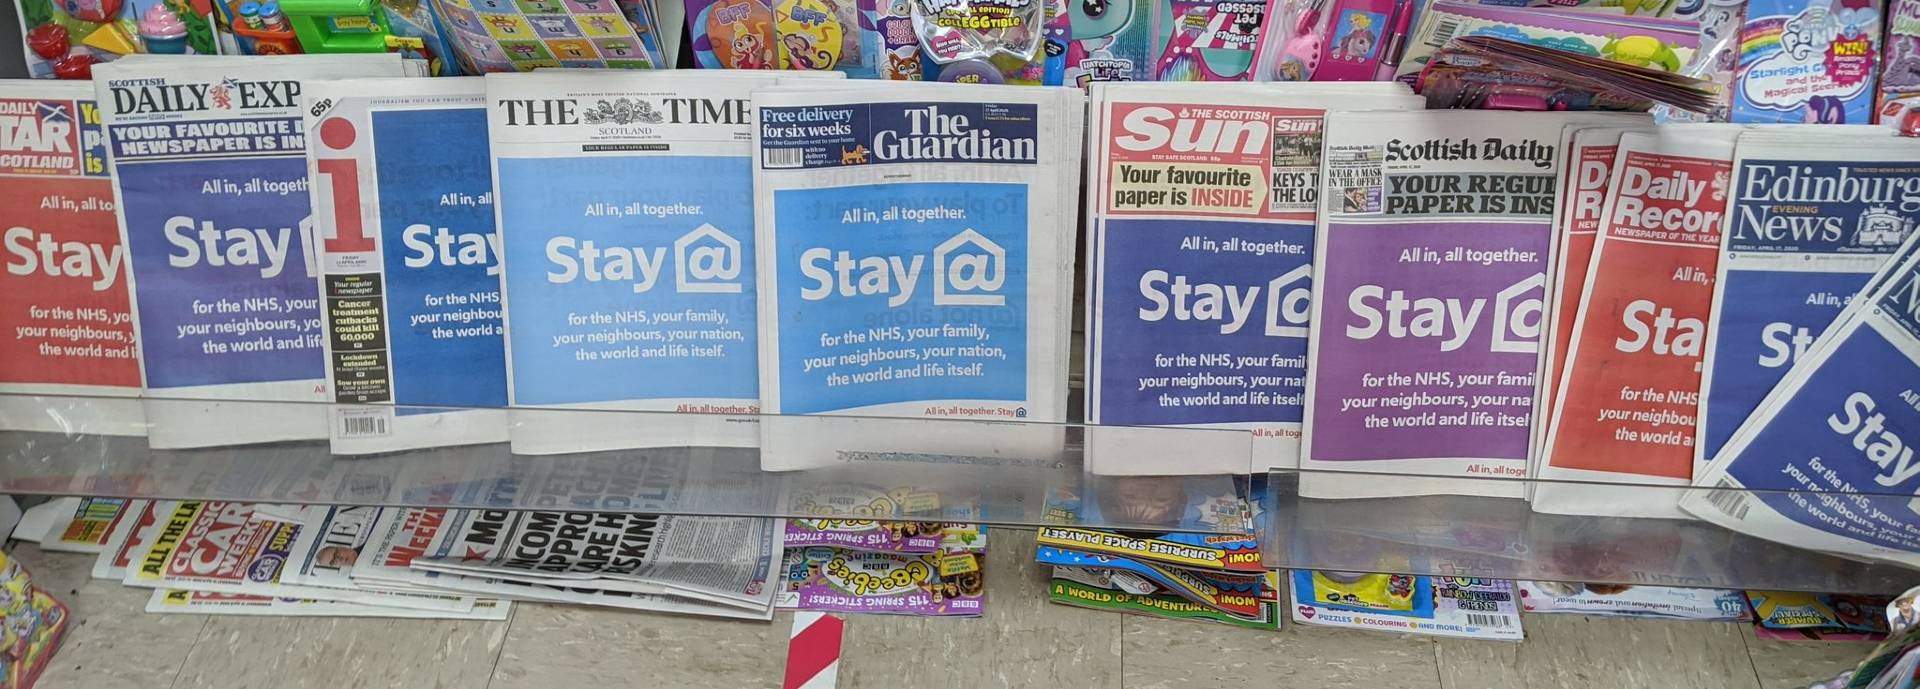 Newspaper shelves in a newsagents in May 2020 showing headlines including 'Stay Home!'